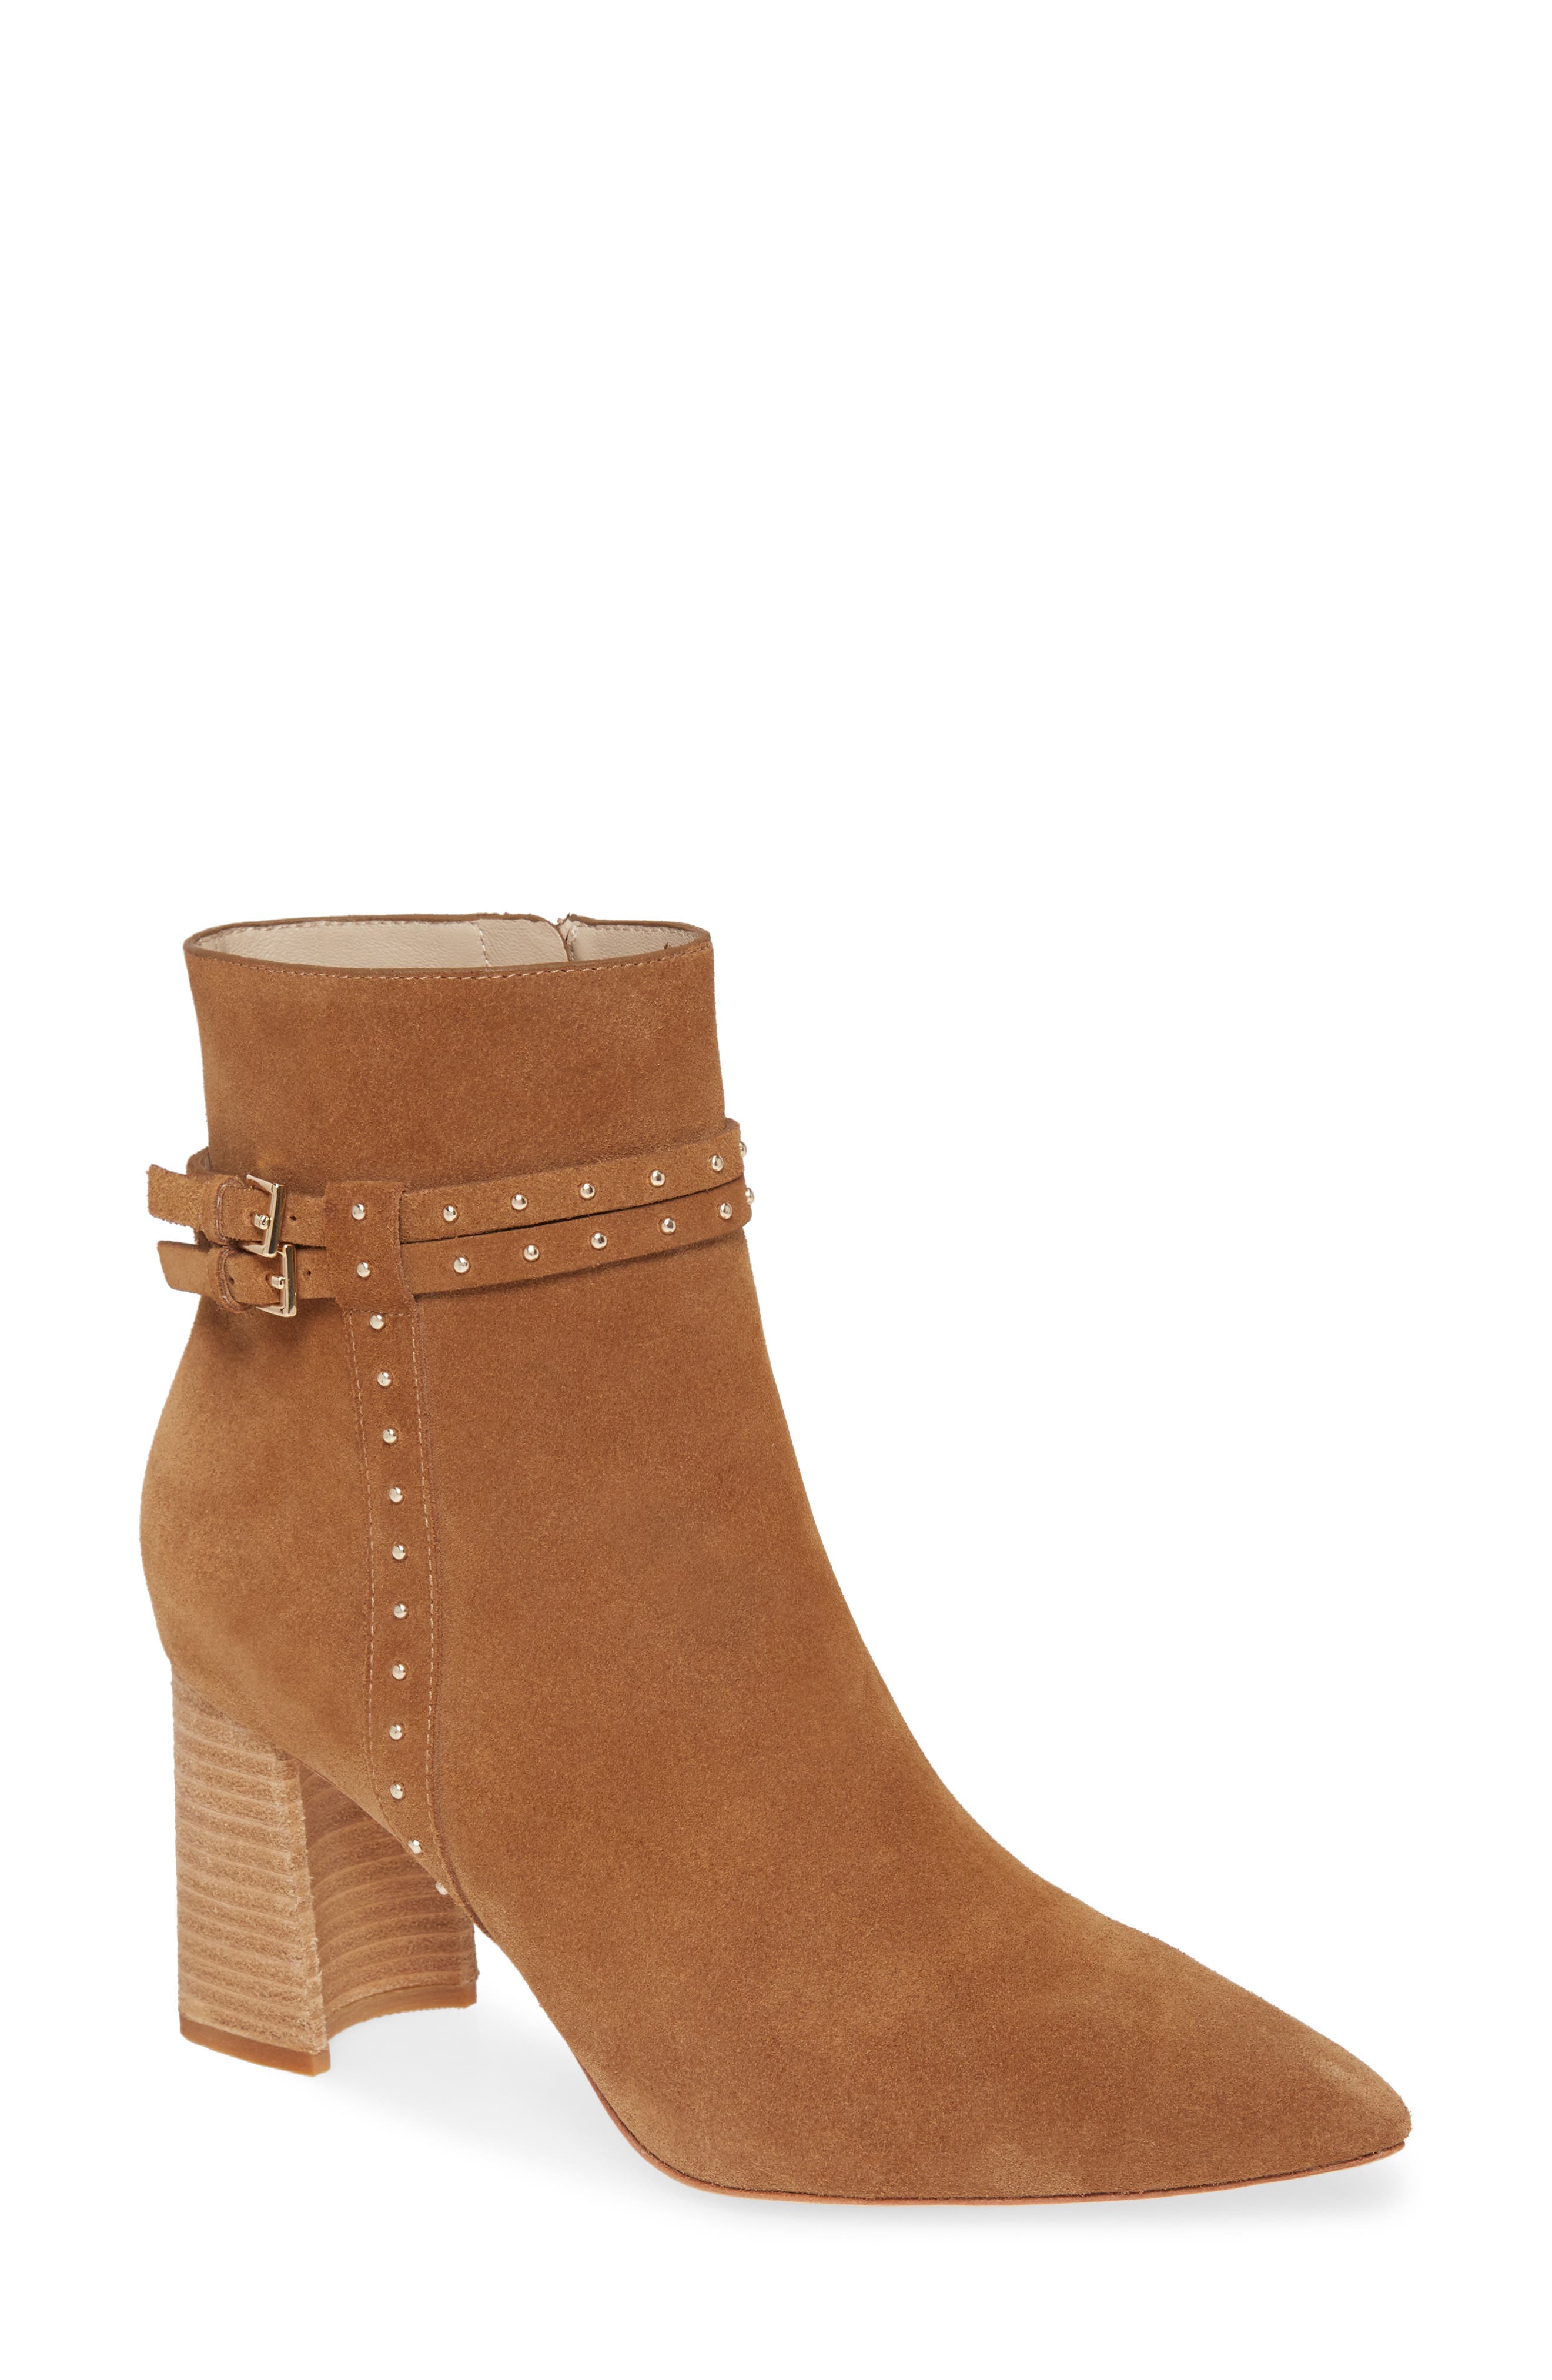 paige boots nordstrom